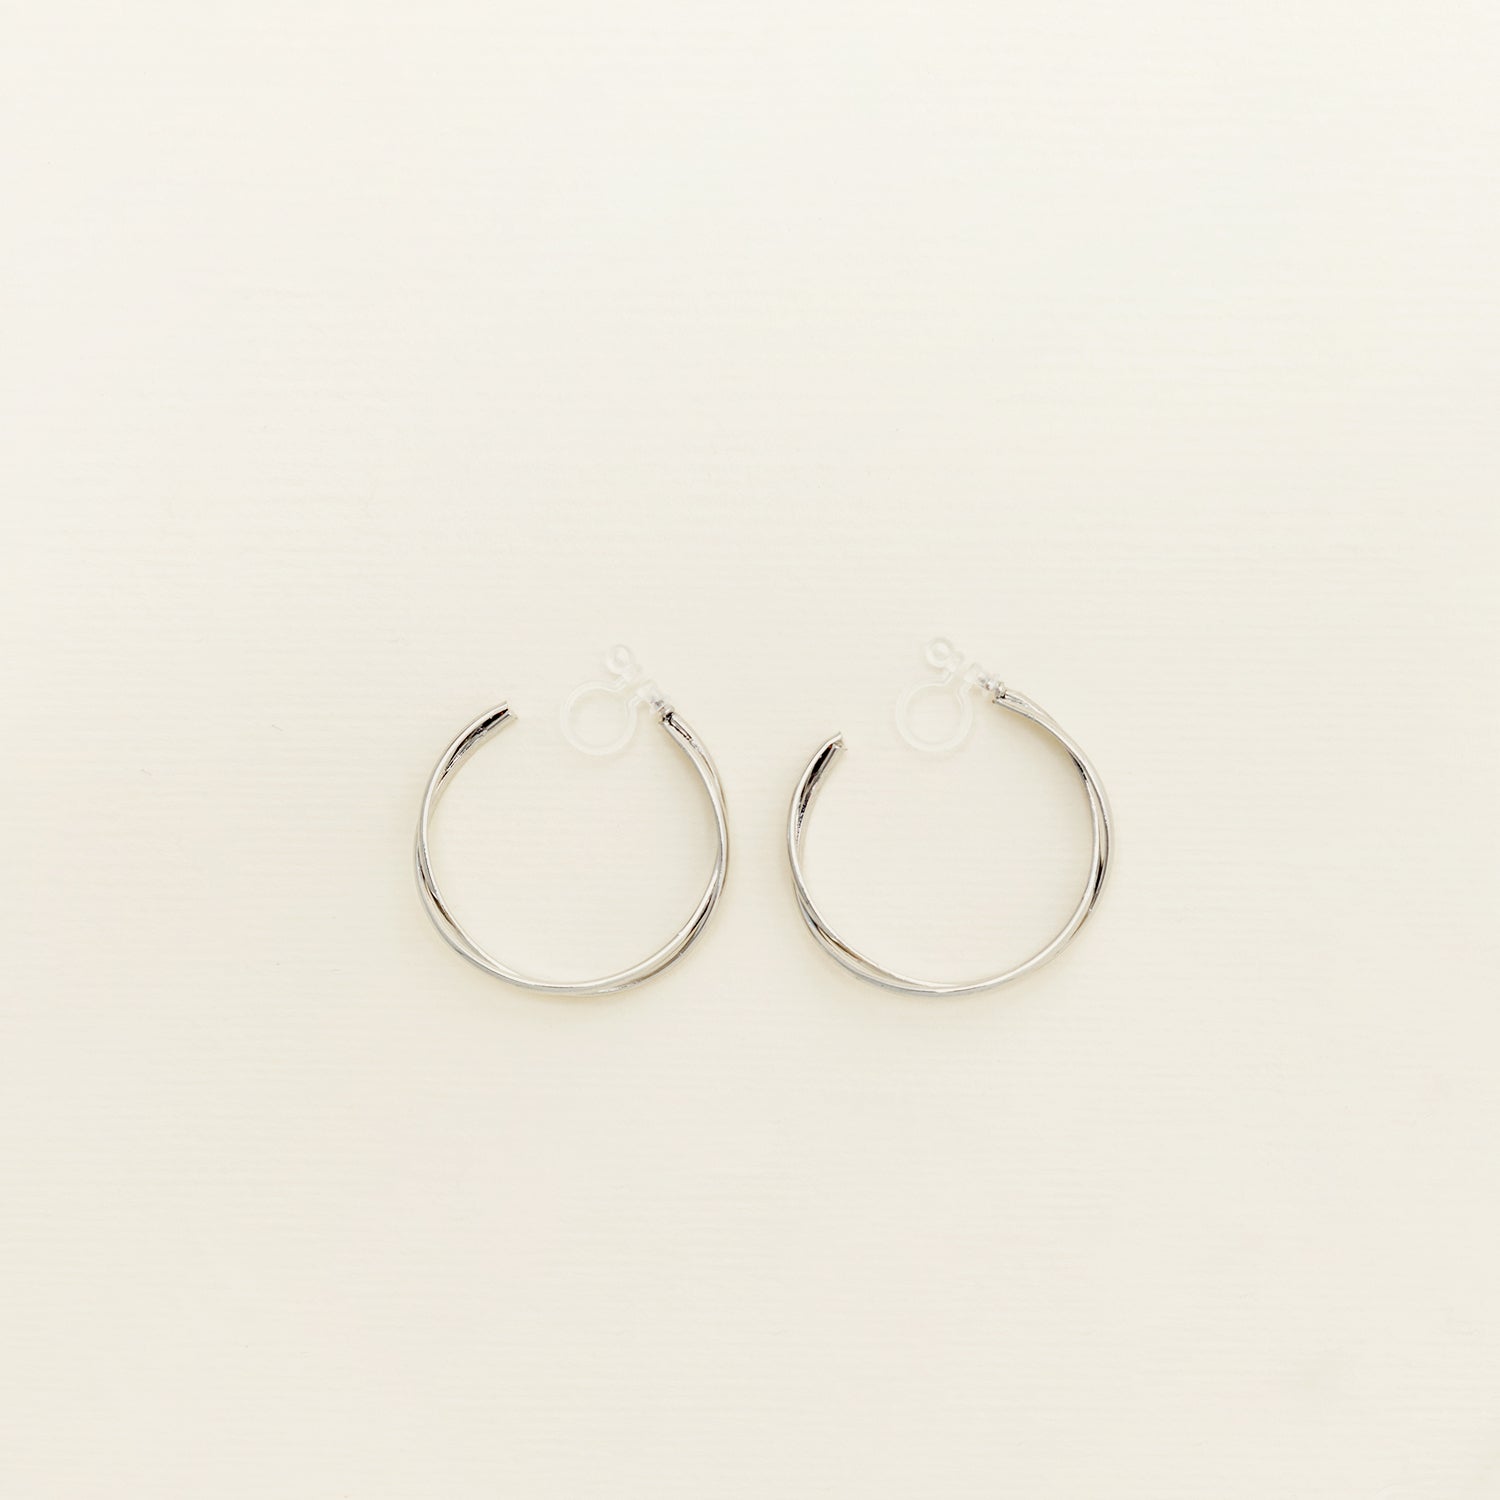 Image of the Silver Vienna Hoop Clip-On Earrings are crafted of Silver Tone Metal Alloy and feature a resin clip-on closure. These earrings are suited for all ear types, providing a medium-secure hold and an 8-12 hour average comfortable wear duration. Adjustment is not possible for this item; it is sold as a single pair in gold and silver.